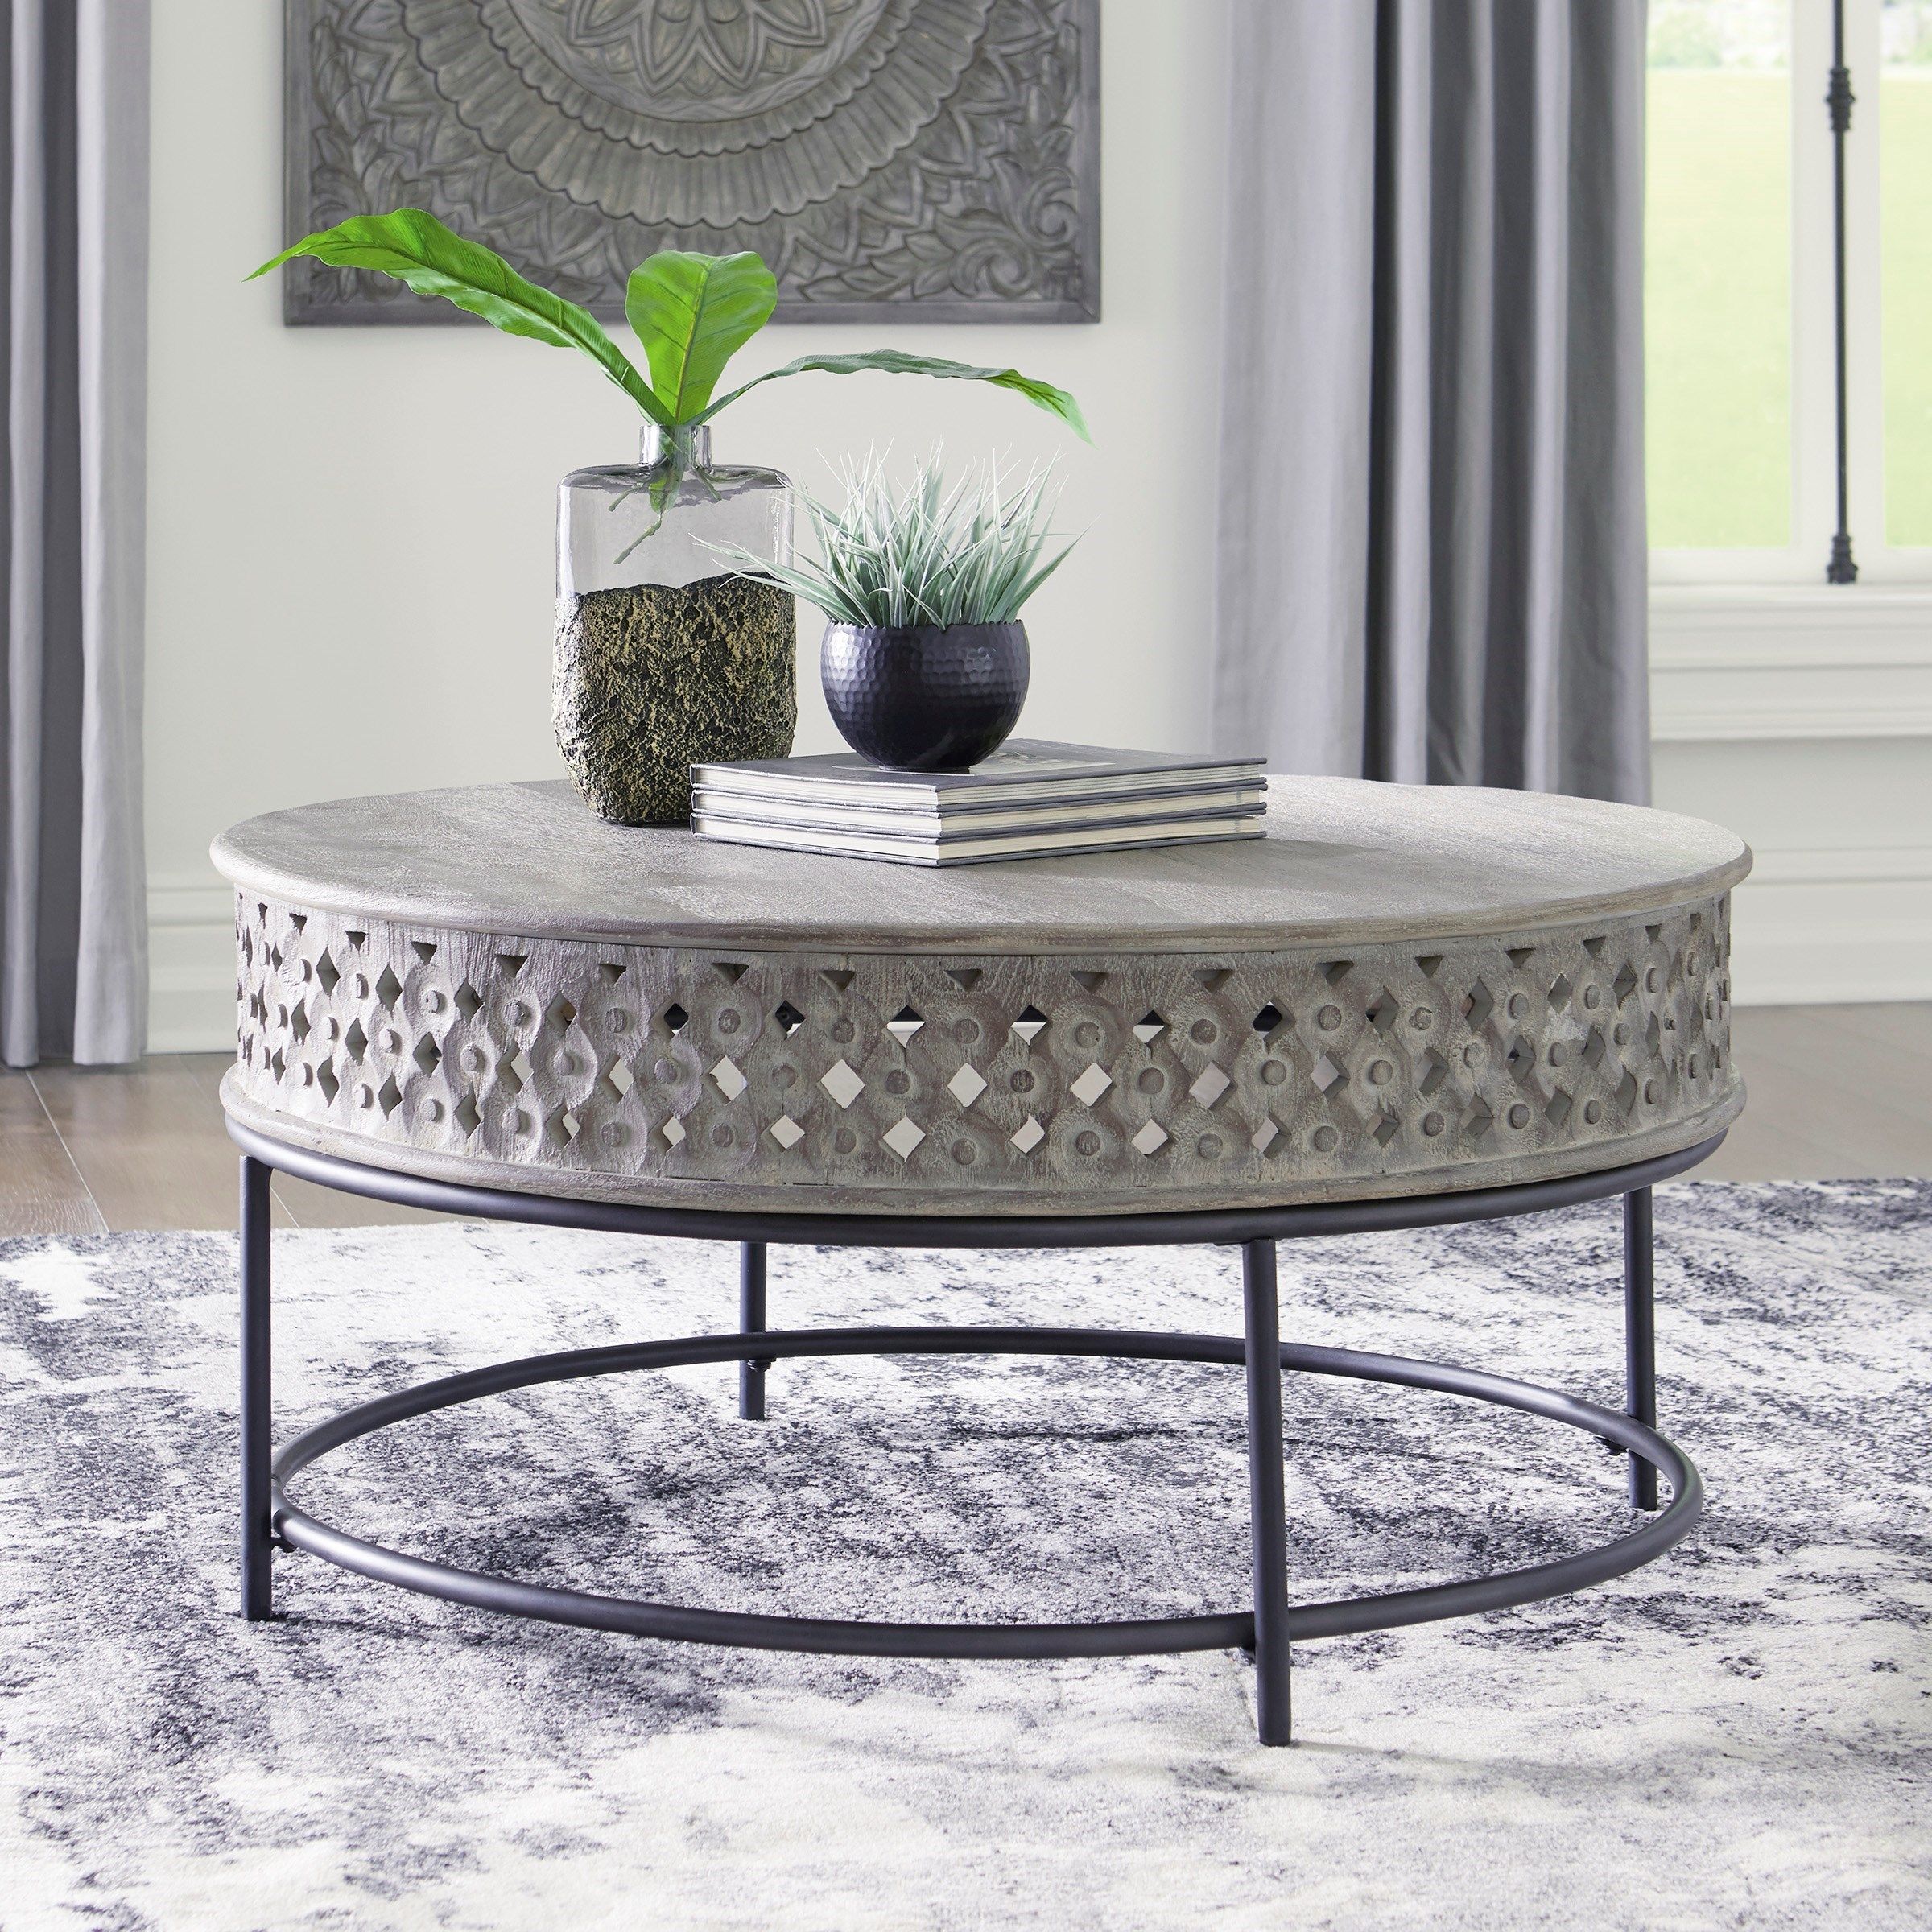 Signature Designashley Rastella T968 8 Carved Mango With Regard To Gray Driftwood And Metal Coffee Tables (View 14 of 15)